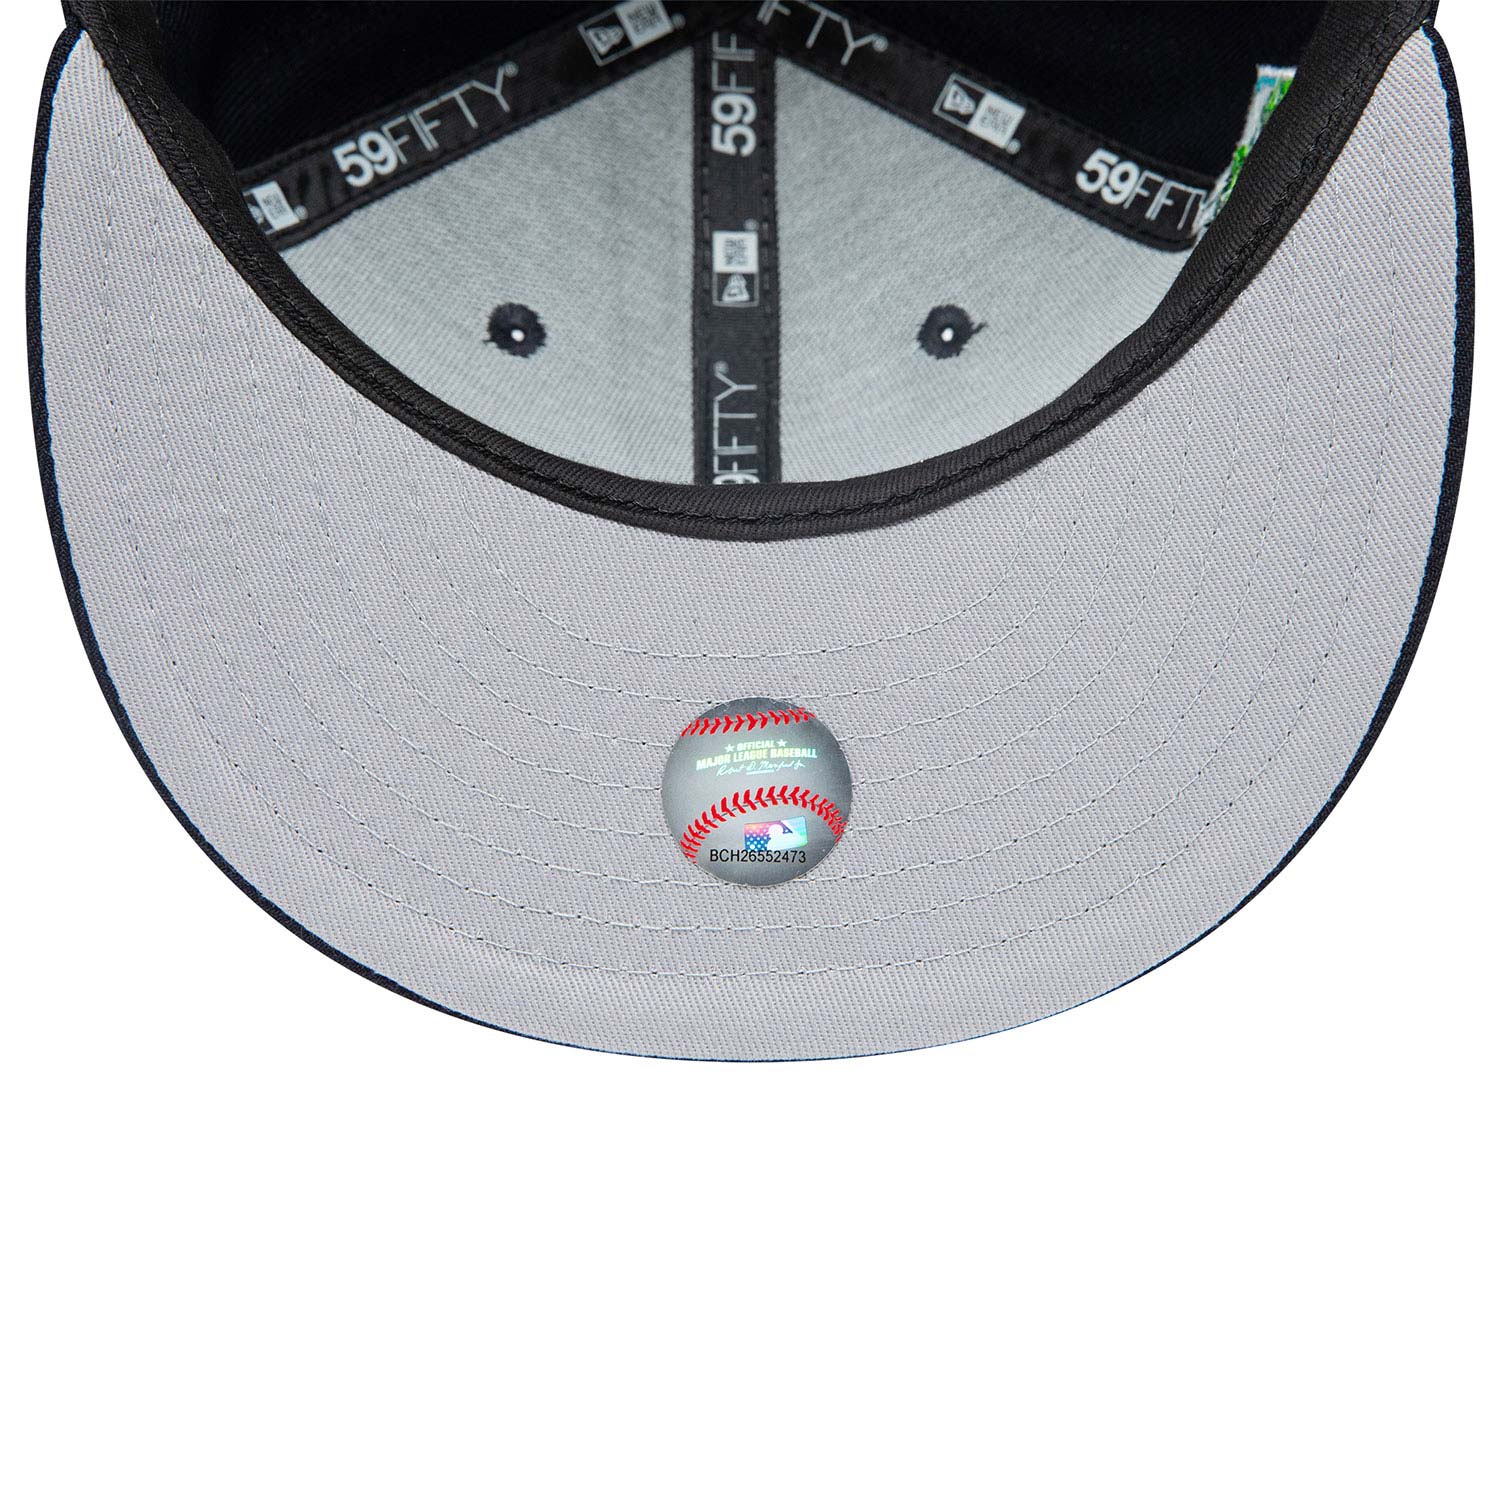 Atlanta Braves Navy Stateview 59FIFTY Fitted Cap